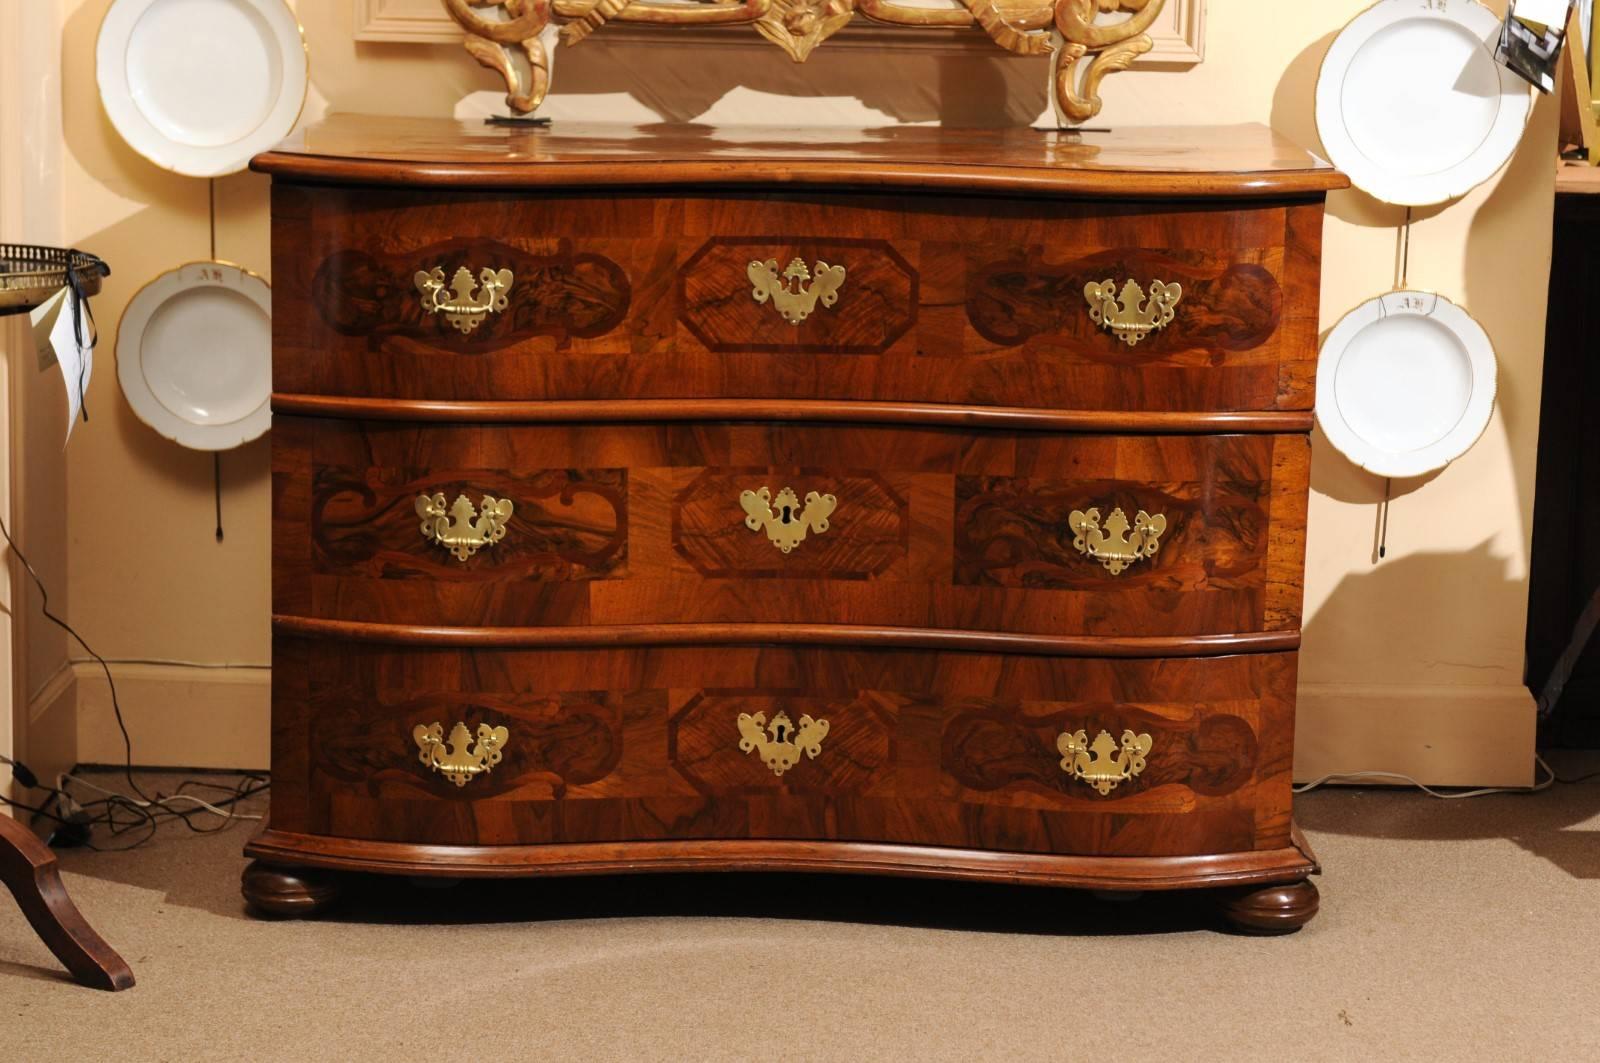 Parquetry inlaid walnut commode with serpentine shape, bun feet, and three (3) drawers, 19th century Germany.